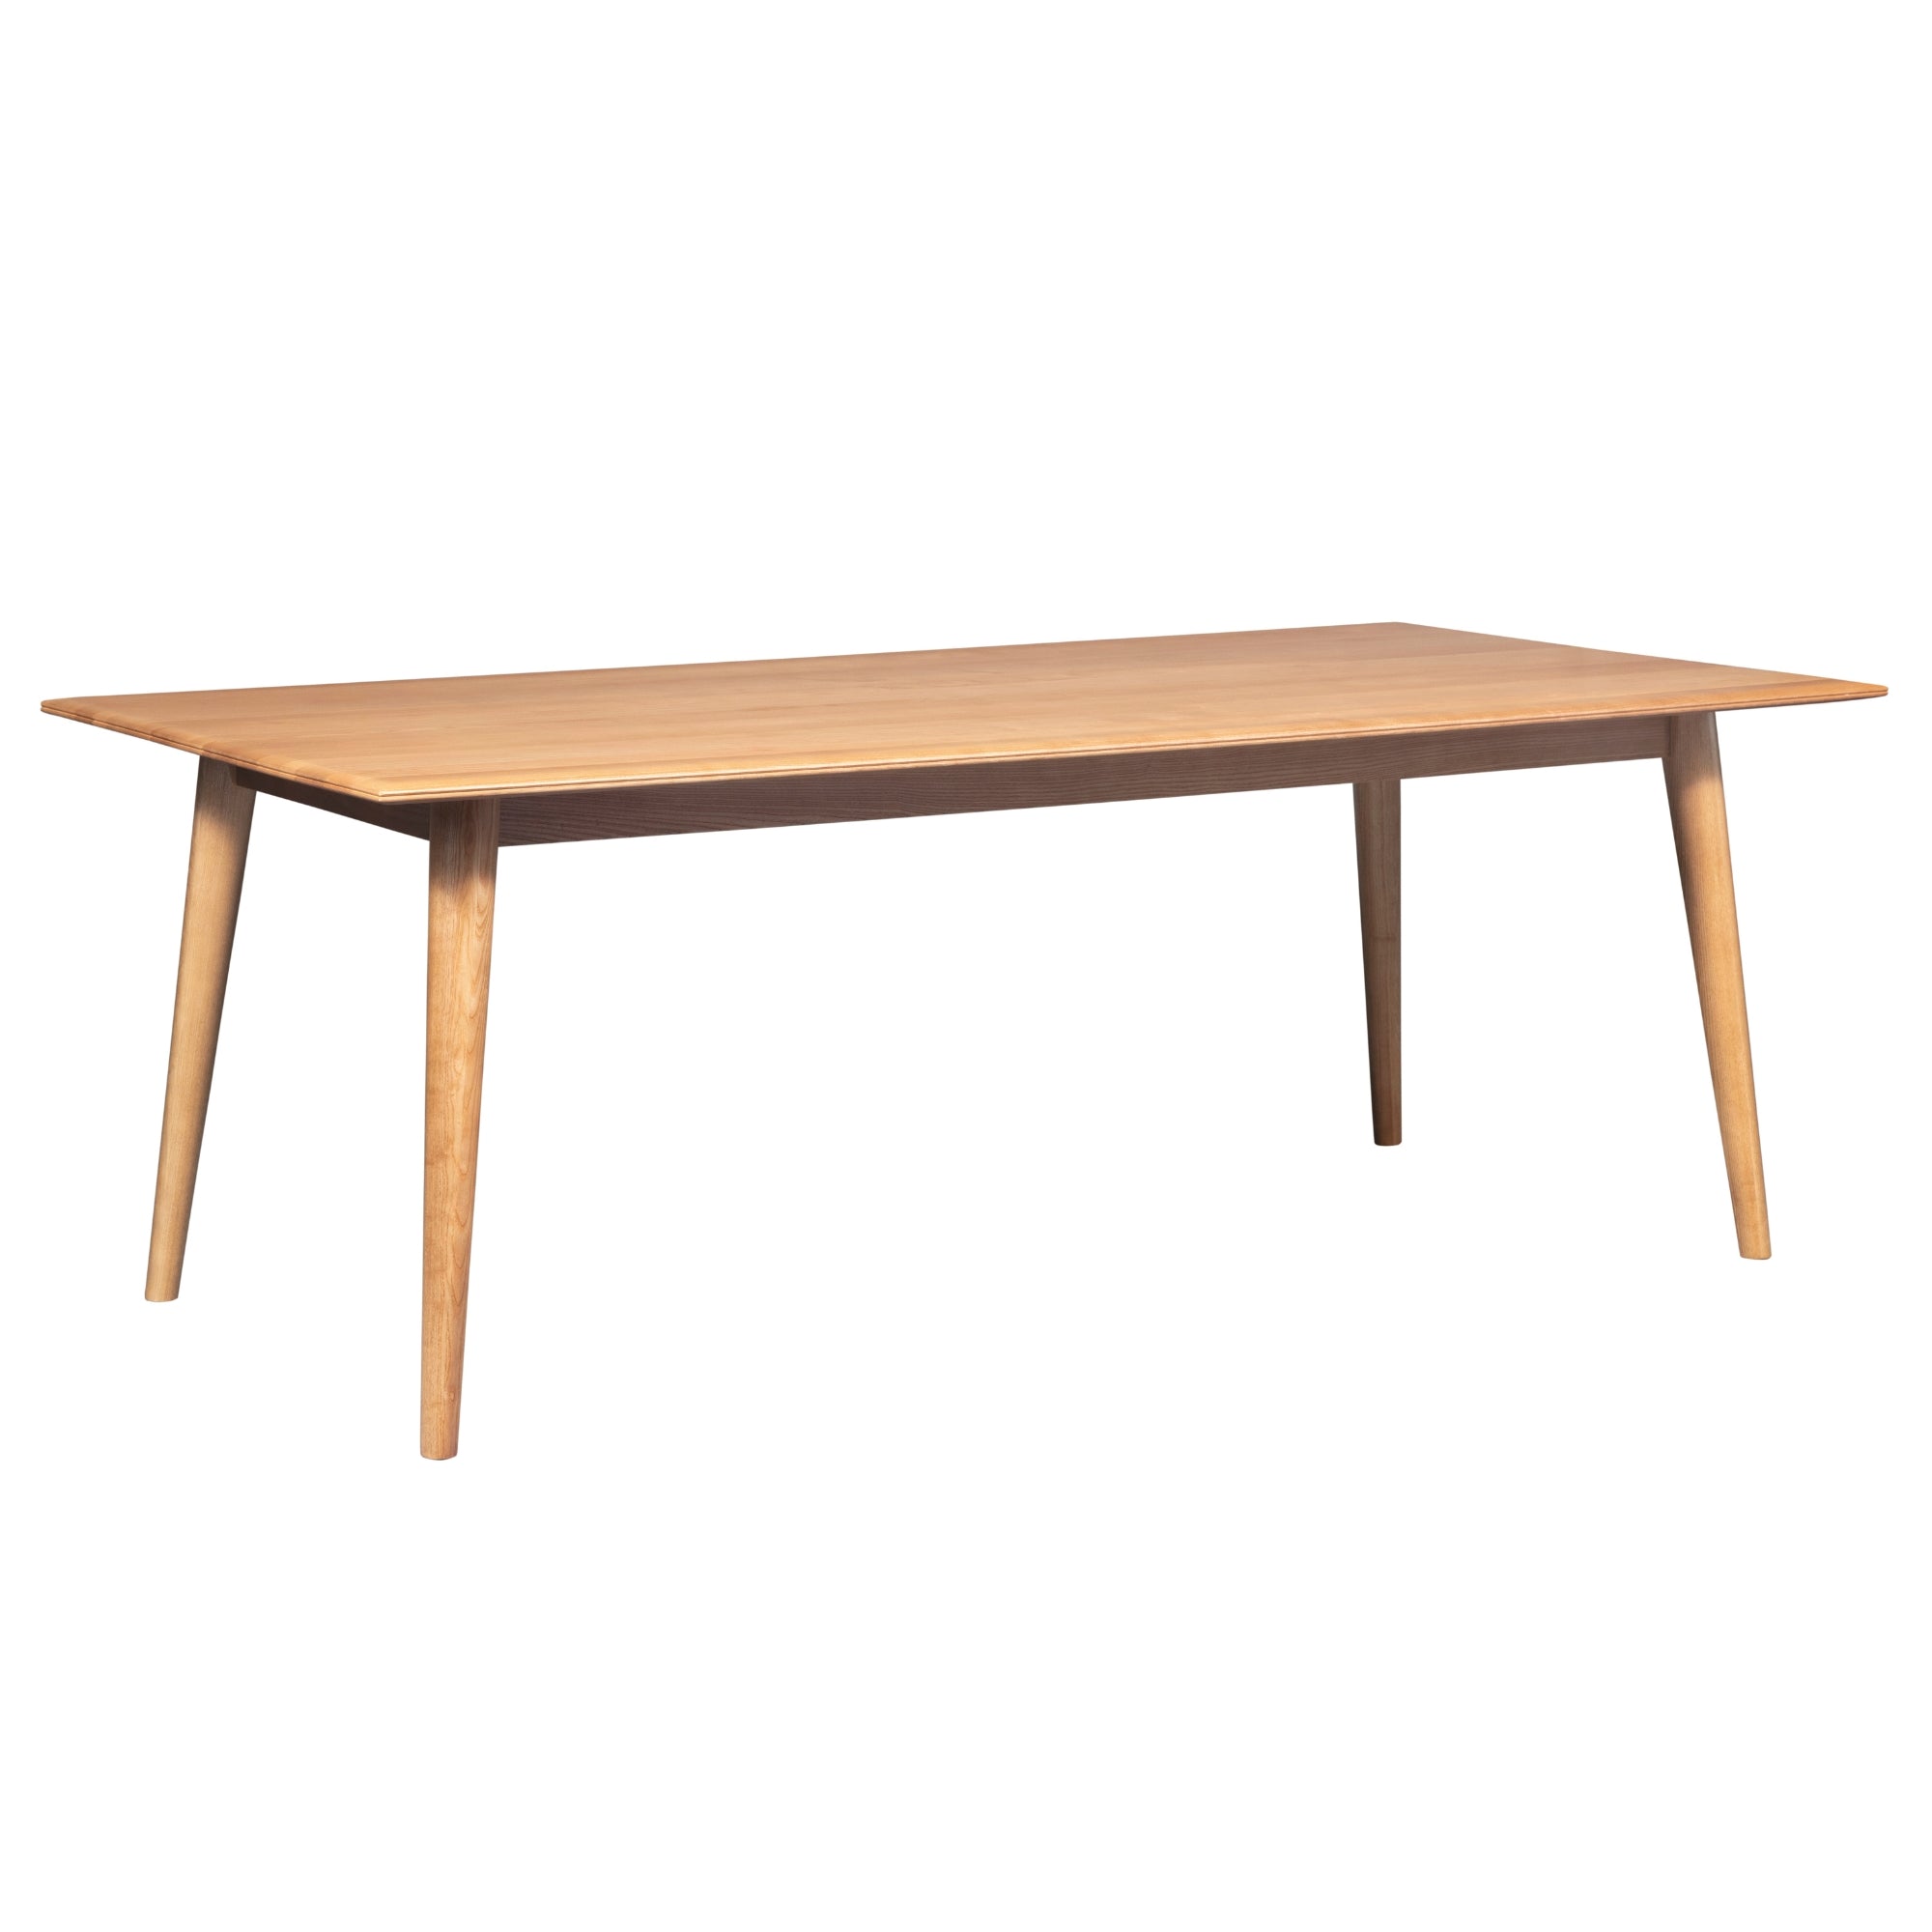 Solid Ash Wood 210cm 8-Seater Dining Table, Rectangular, Oak